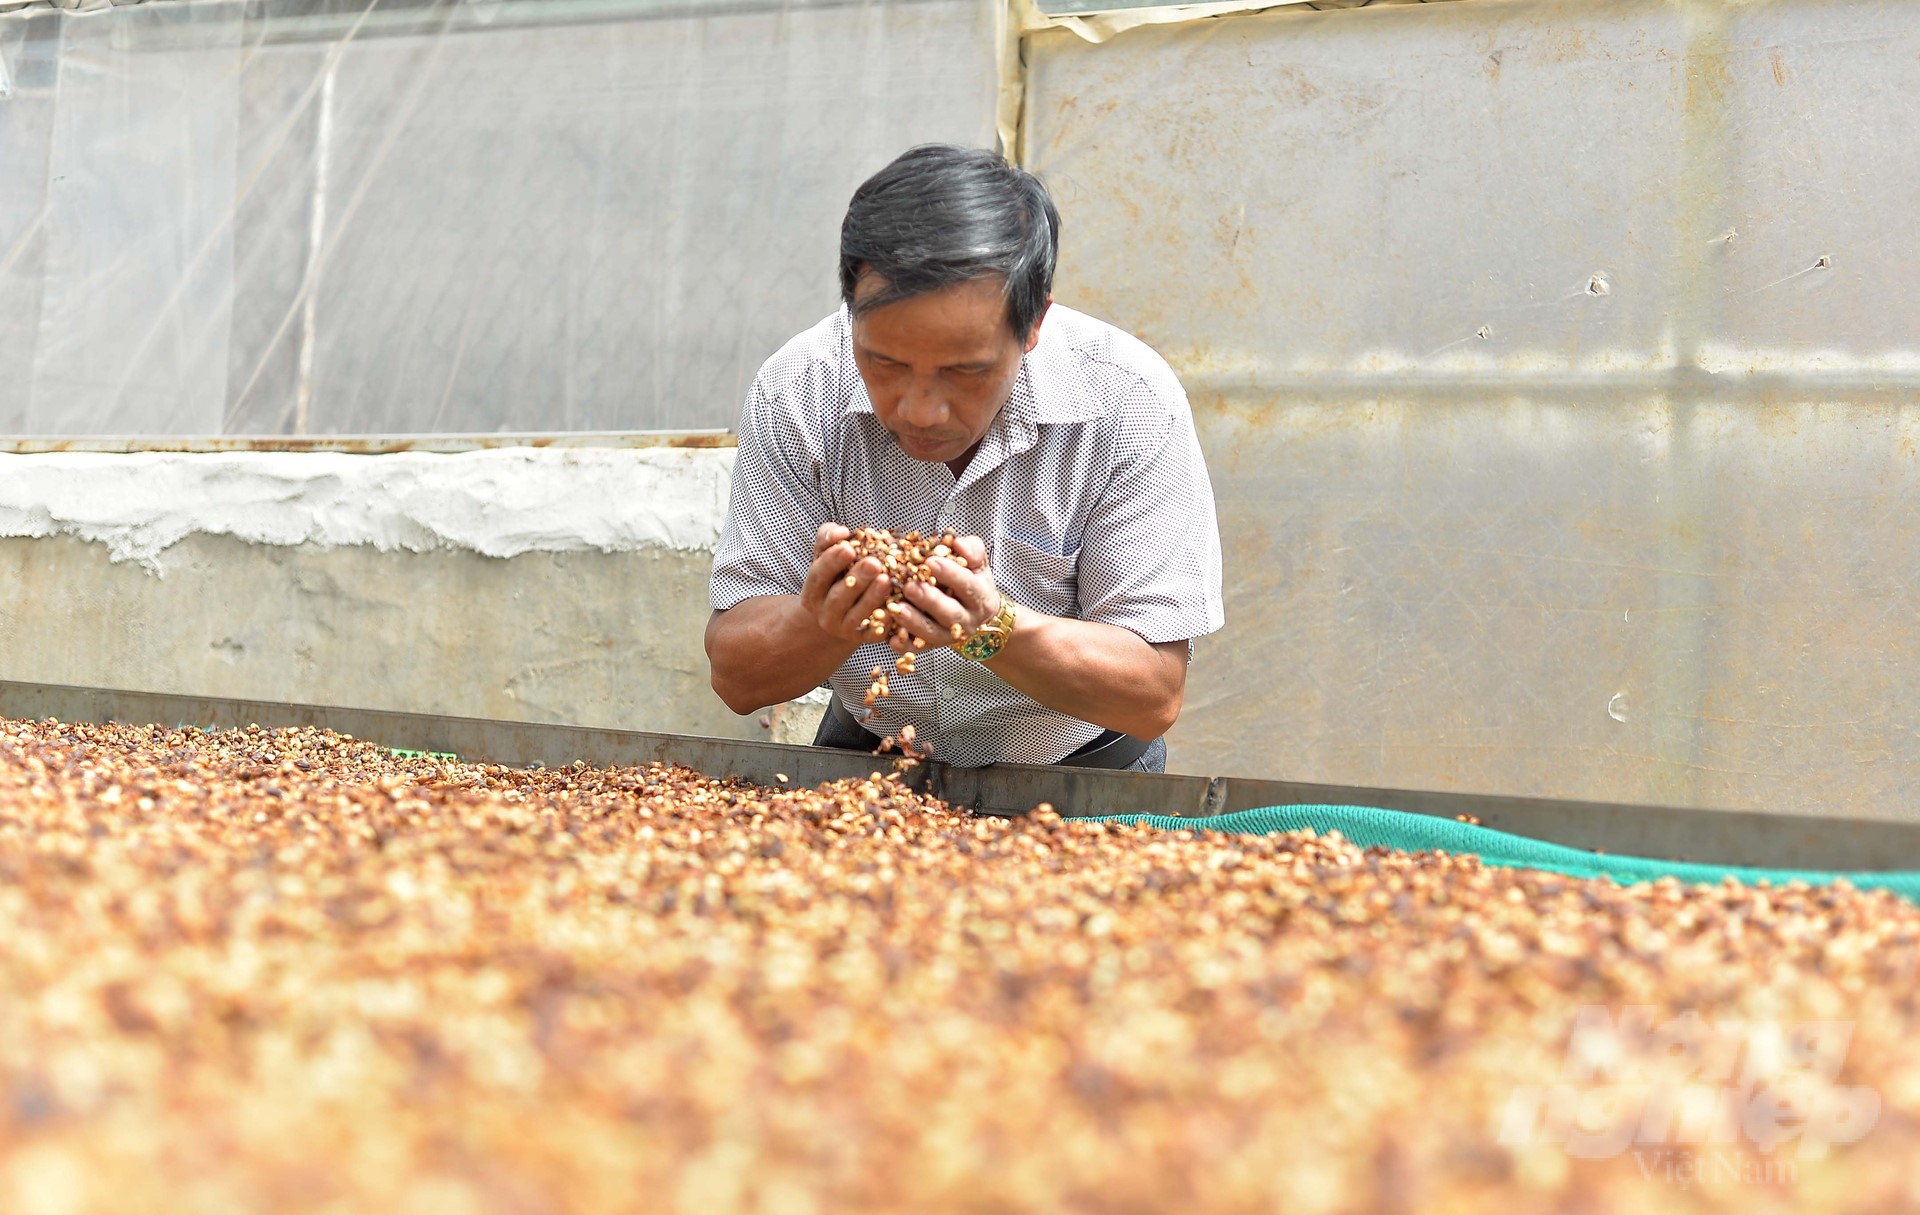 Robusta coffee is interested in the market, and the price is improved, helping Lam Dong farmers improve their income. Photo: Minh Hau.